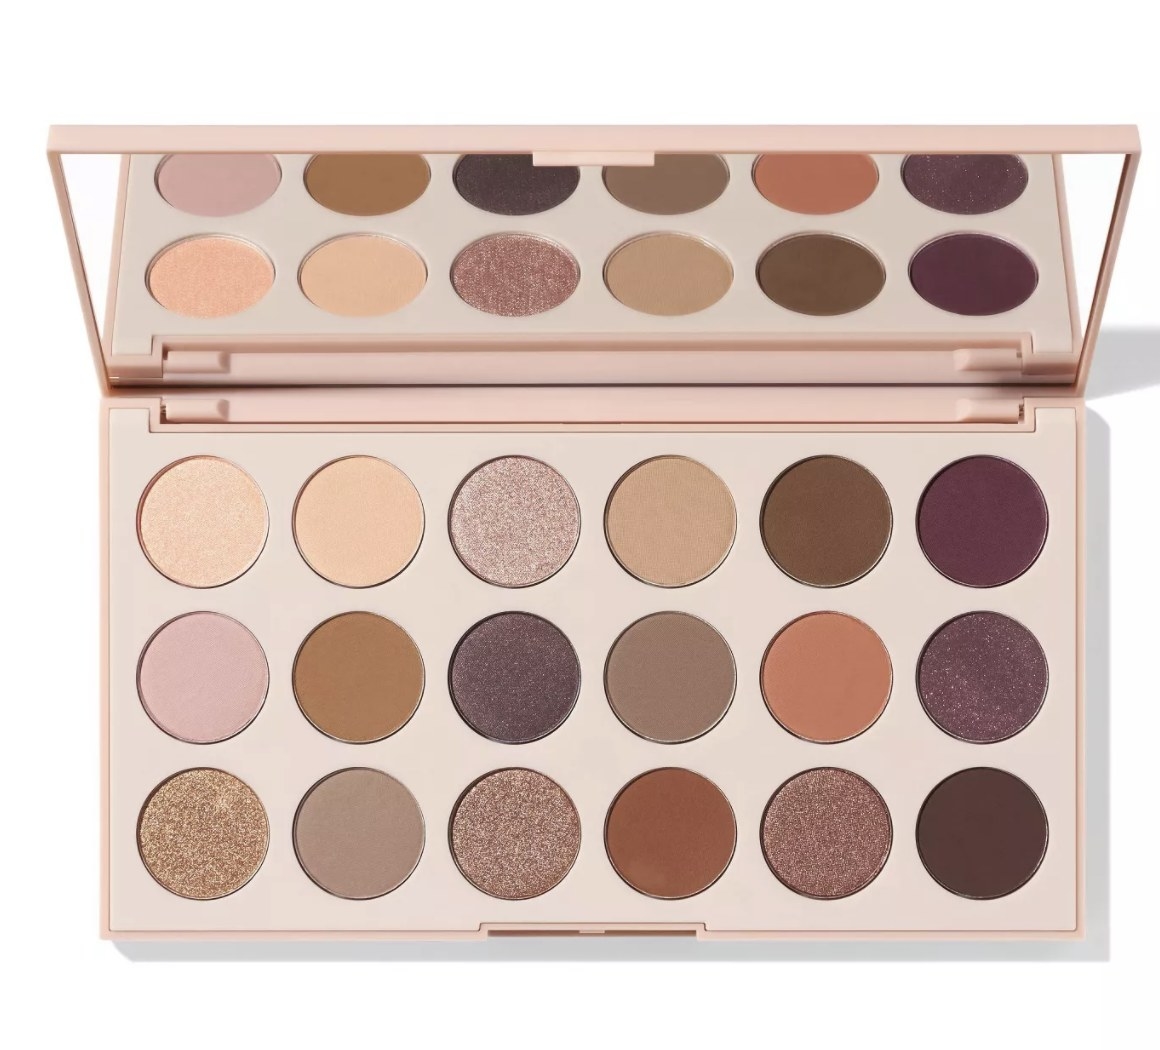 The light pink palette has warm and cool neutral shades and glitter shades